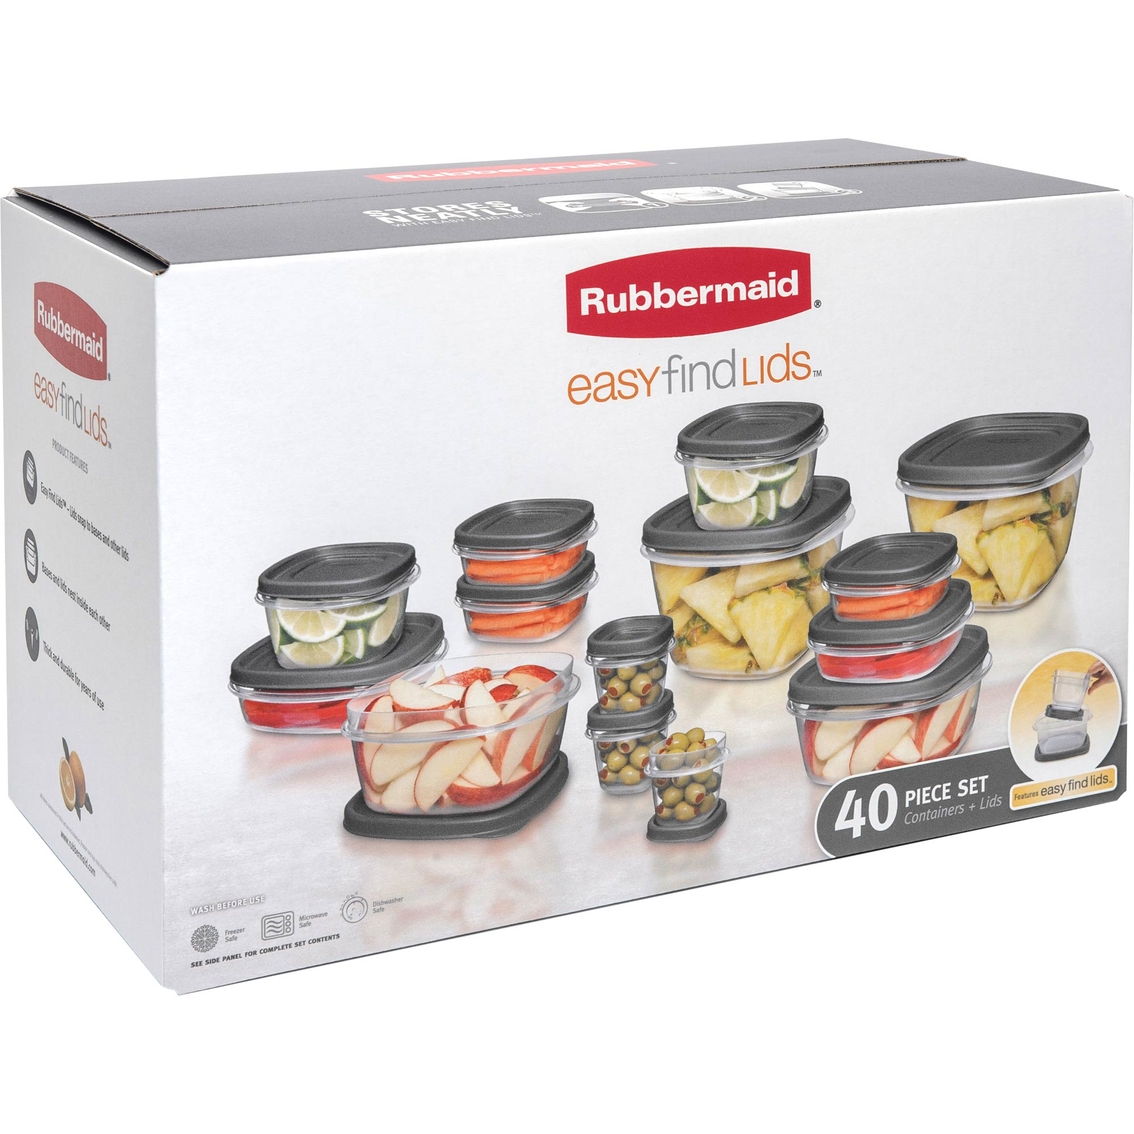 Rubbermaid Easy Find Lids Food Storage Containers 18 PC